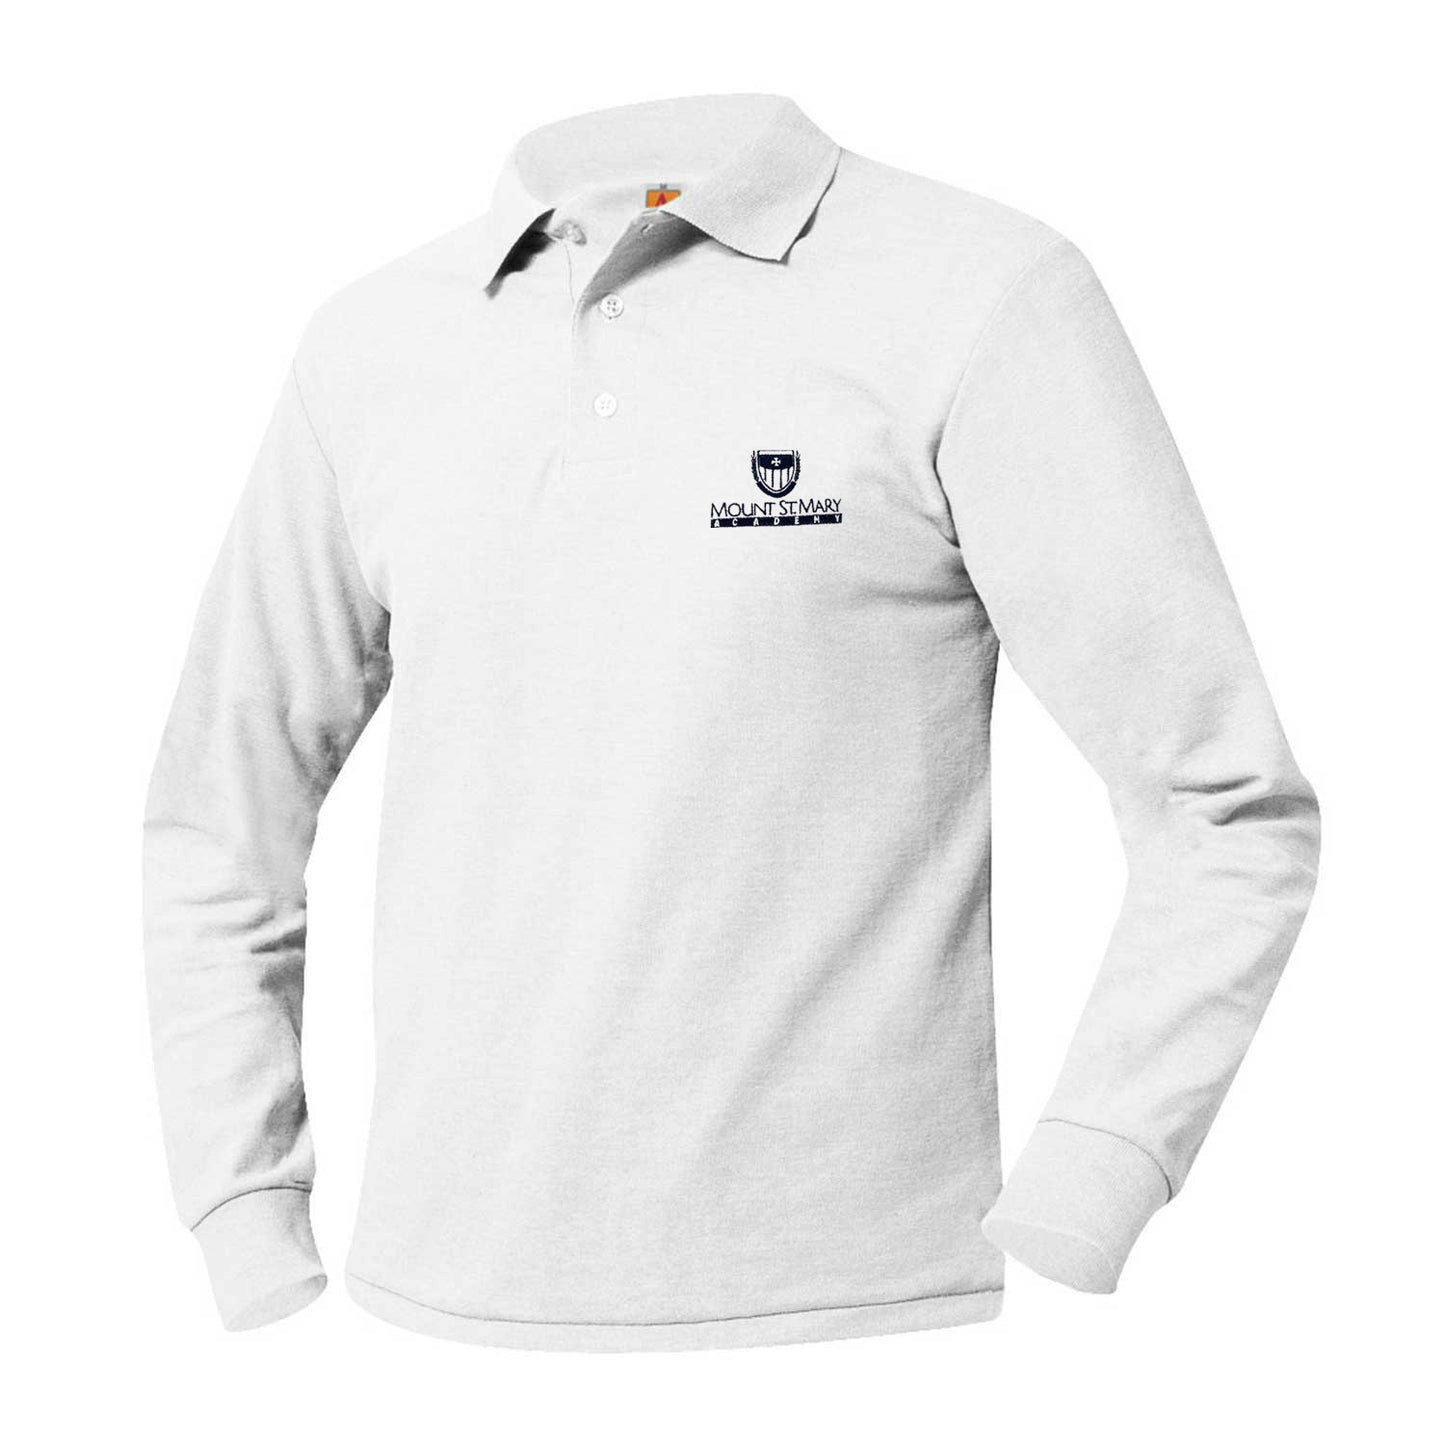 Youth Long Sleeve Pique Polo With Mount St. Mary's Logo